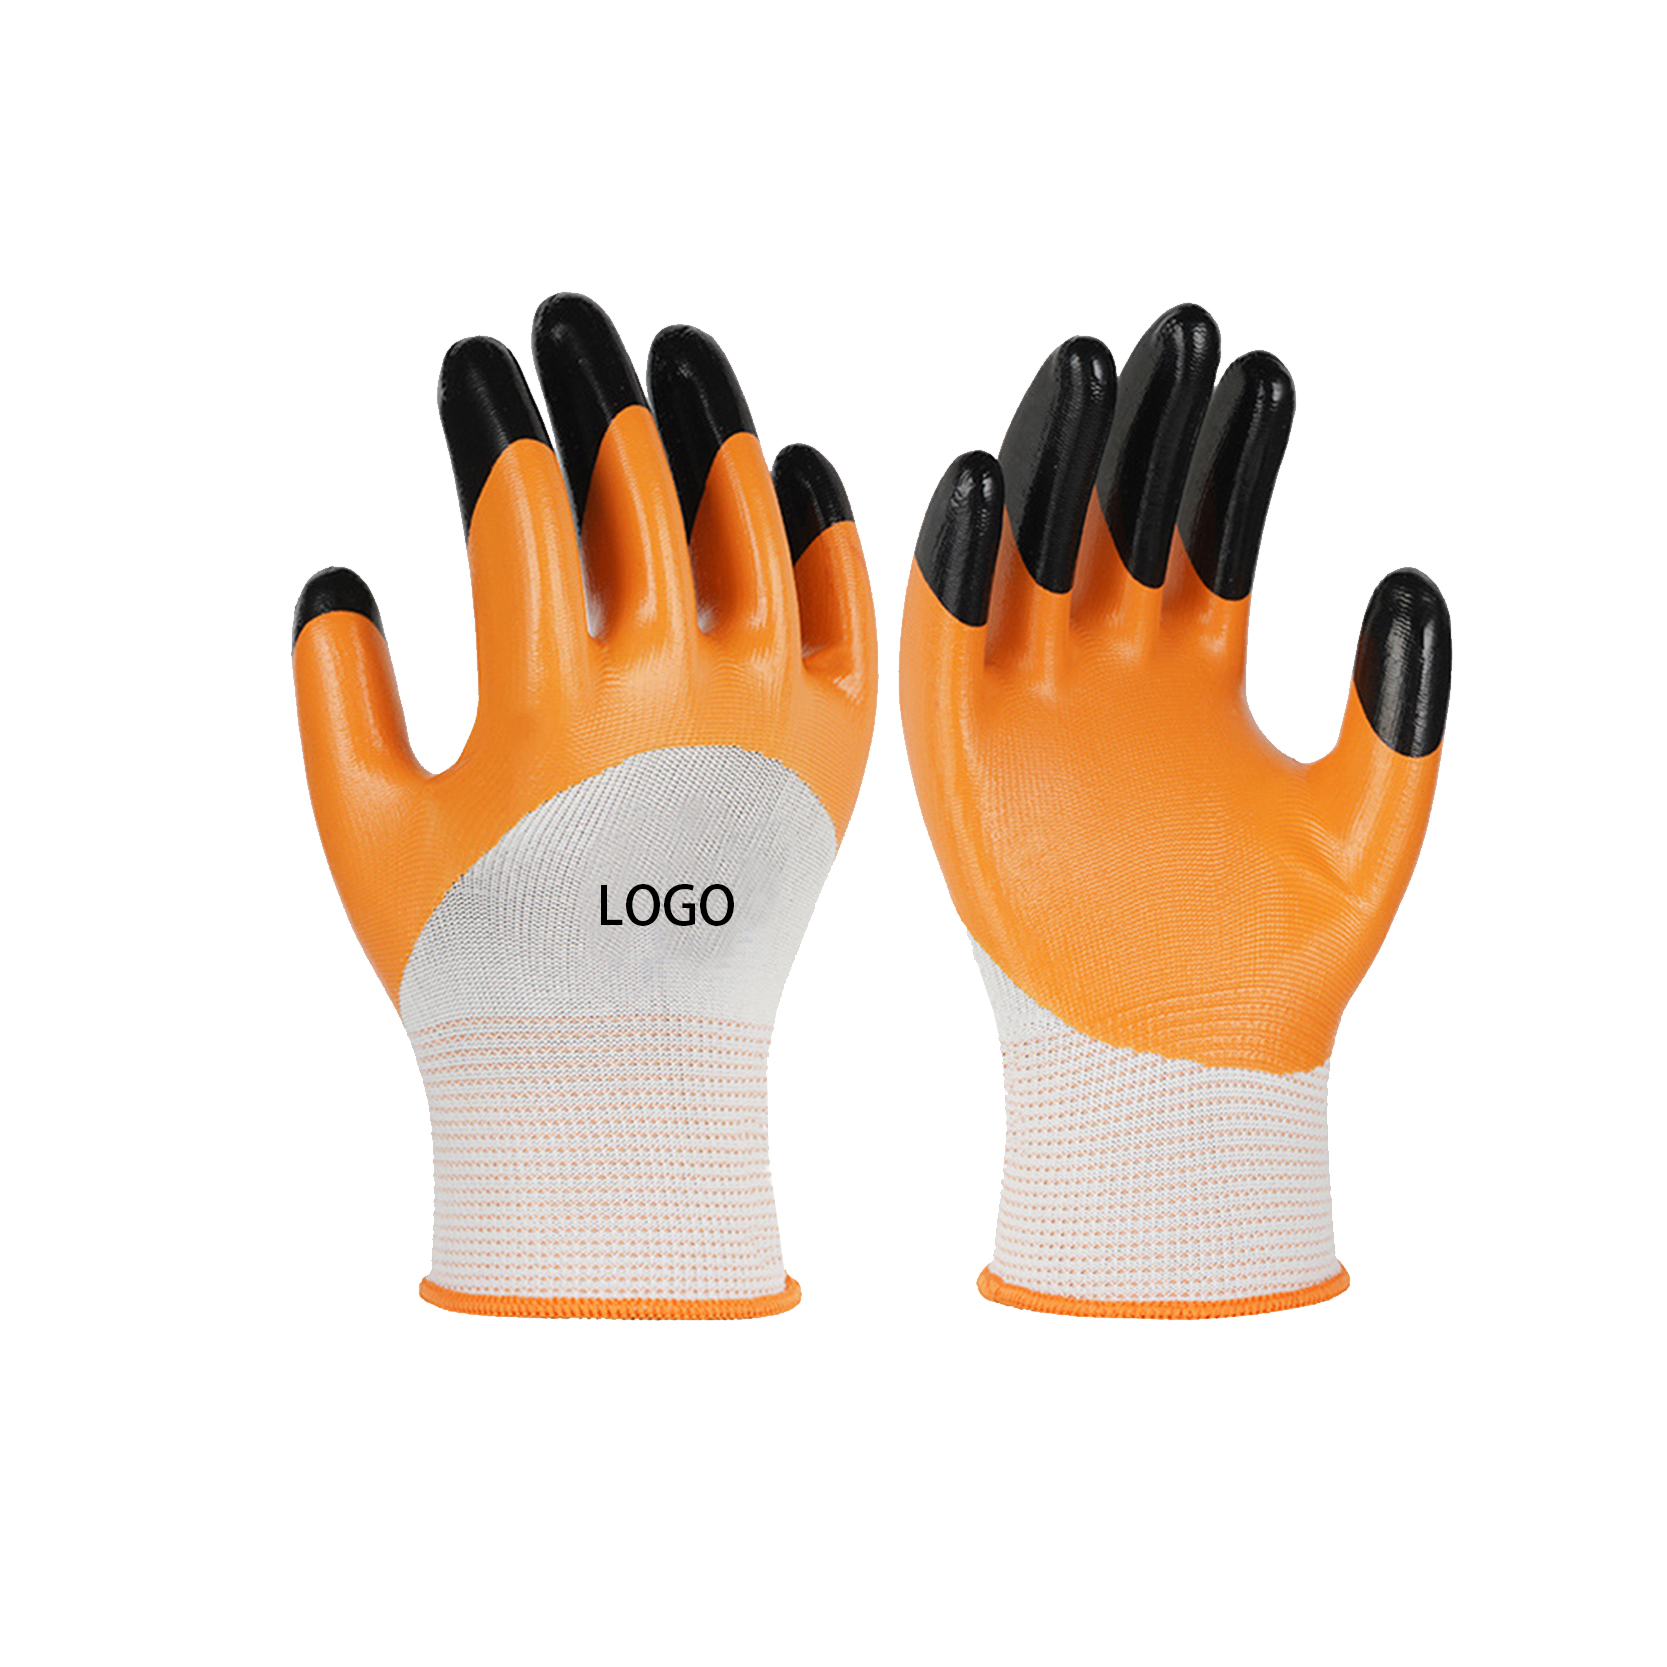 Anti Cutting Nitrile Butadiene Rubber Dipped Film Industrial Gloves Cut Resistant Safety Work Gloves